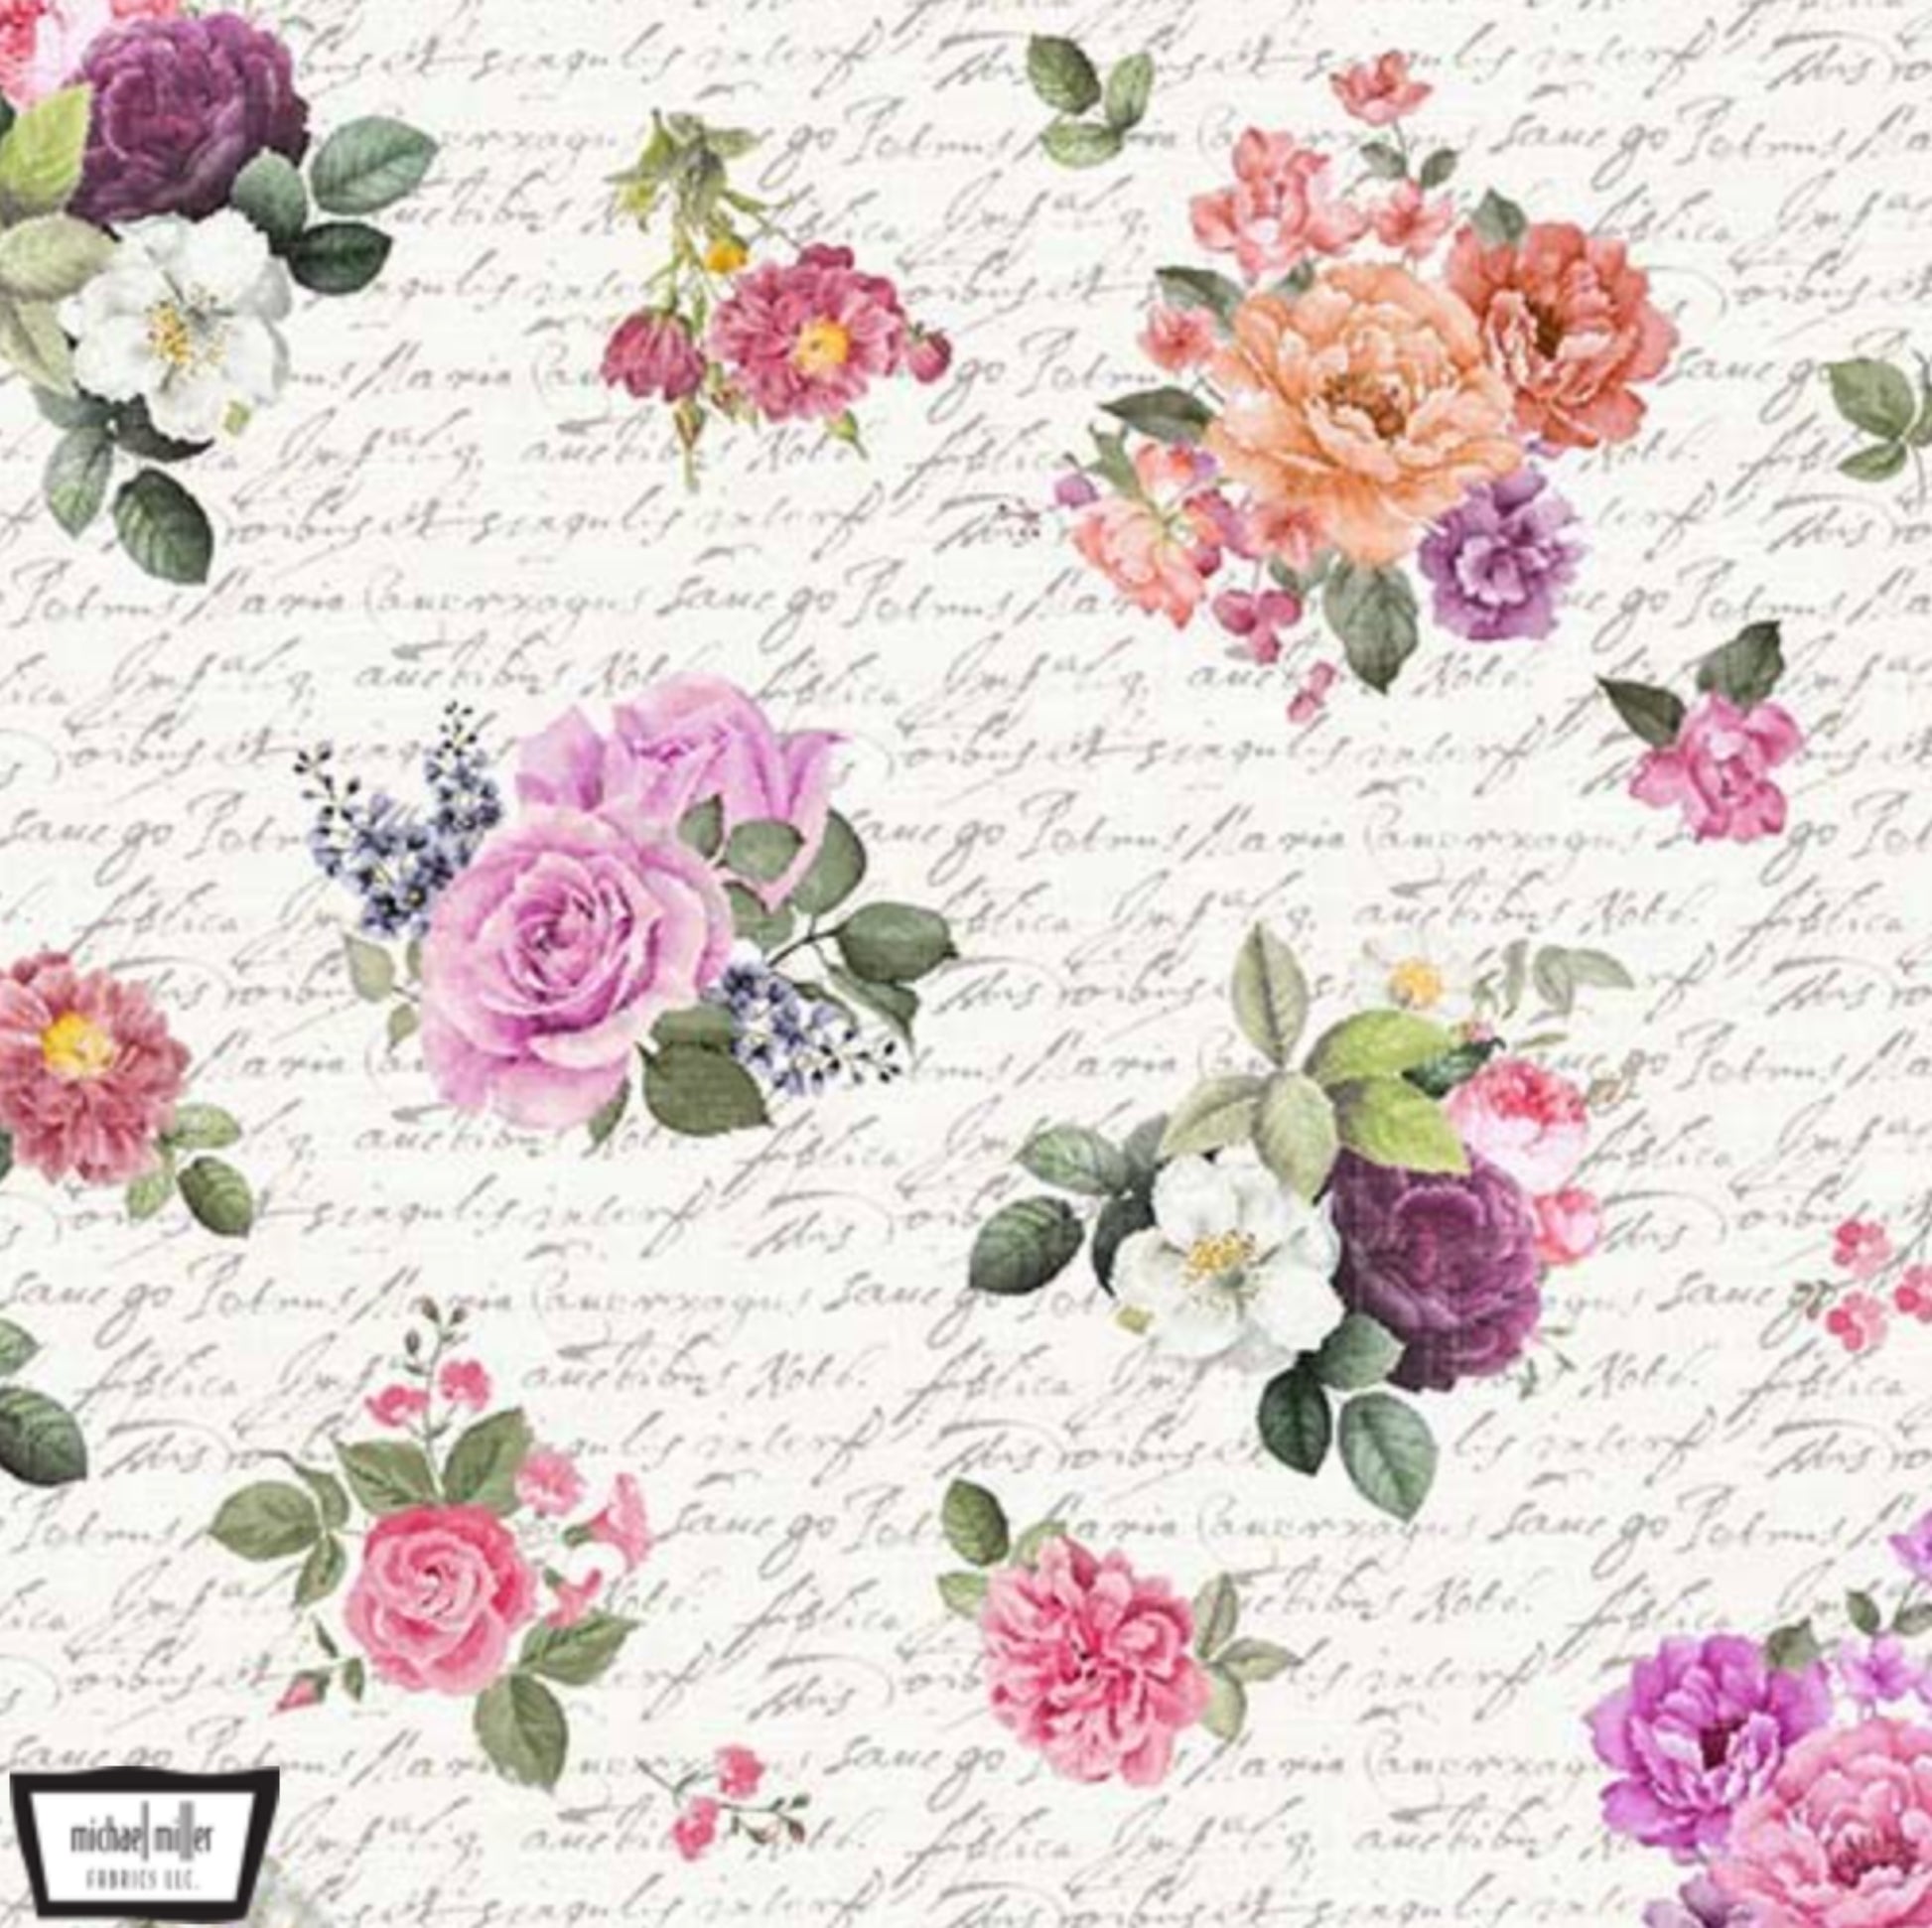 Tres Jolie from the We'll Always Have Paris Collection of fabrics from Michael Miller